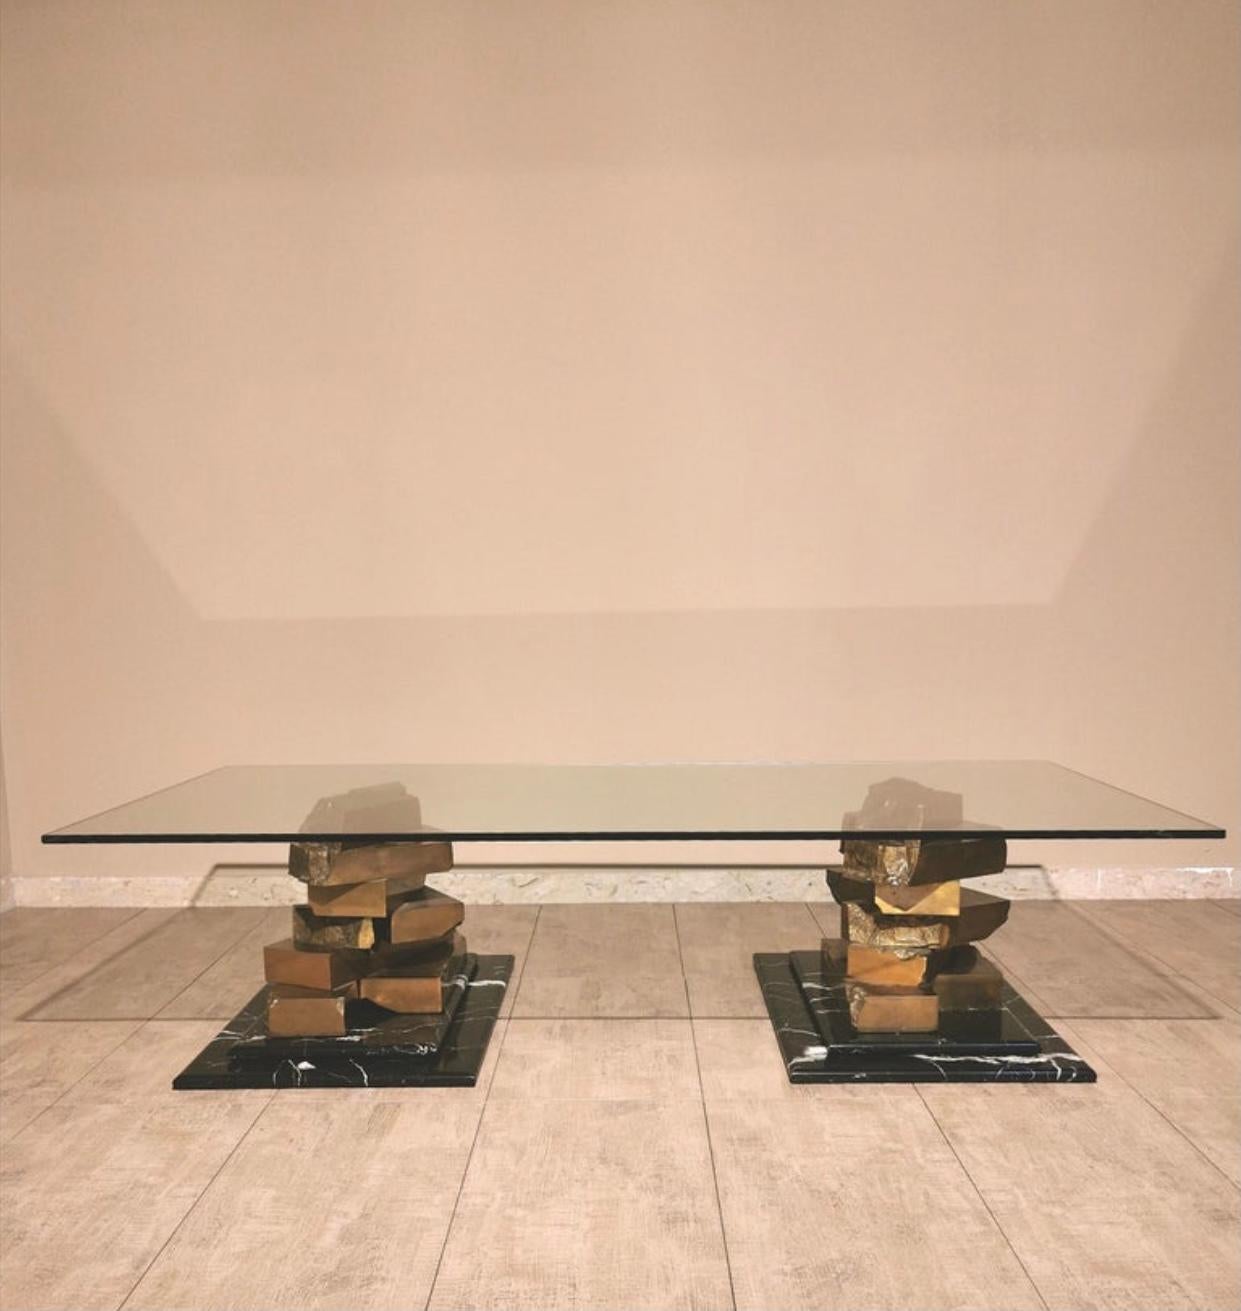 An exceptional and rare large Italian coffee table sitting on two rectangular Marquina marble bases with two sculptures in bronze and a large glass top. A truly outstanding piece of functional art & design. This substantial coffee table weighs a